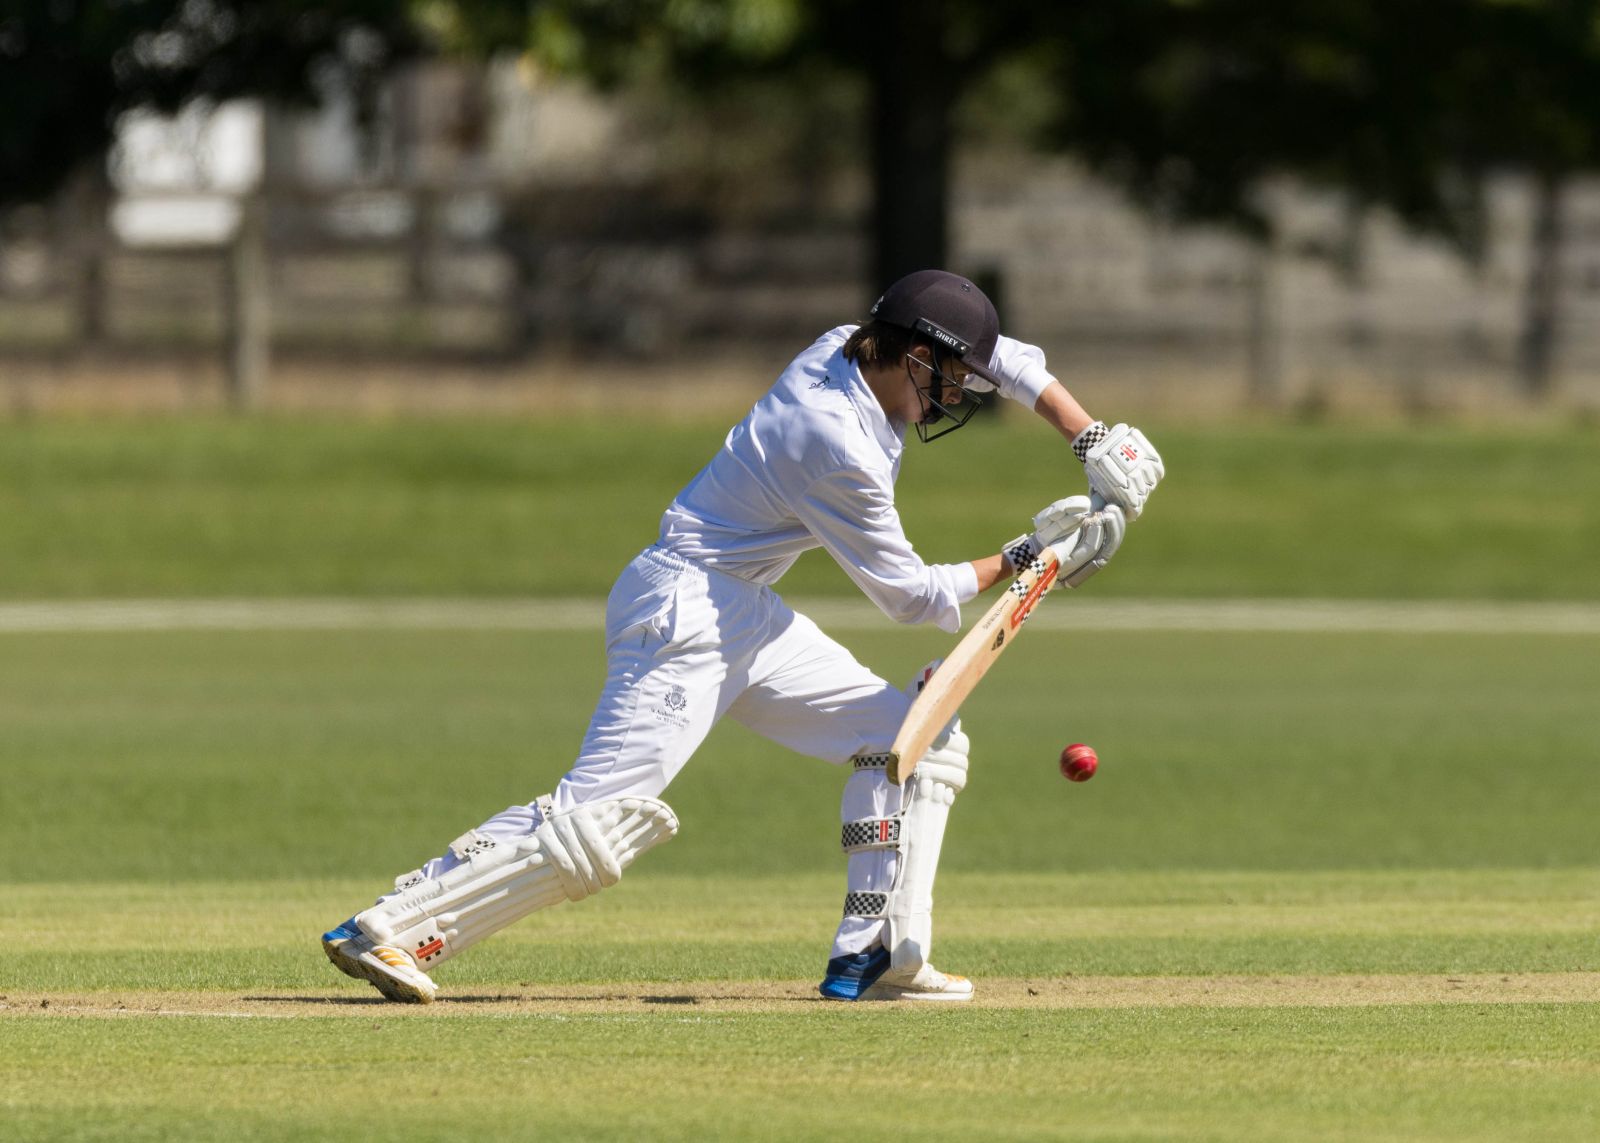 St Andrew's College student playing cricket in white with bat and ball